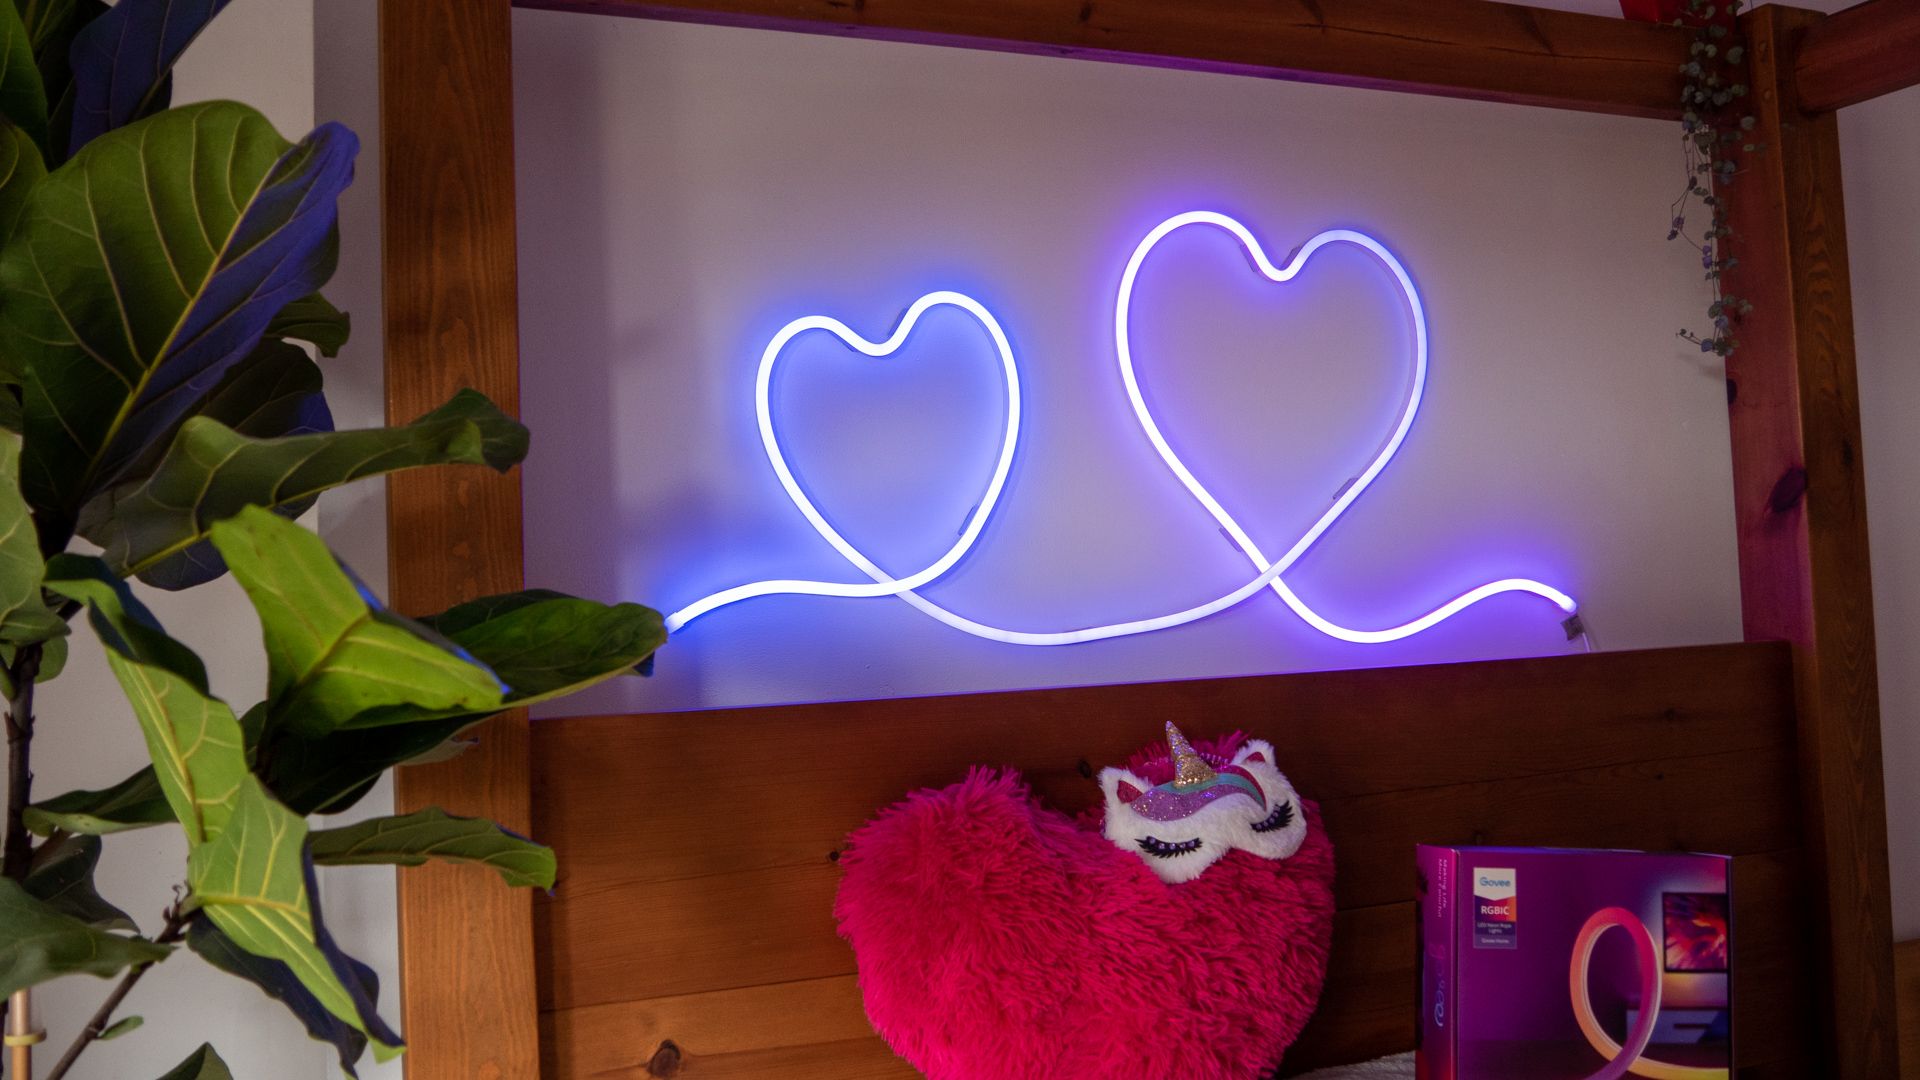 Govee Neon Rope Light Review: Your Room Needs This!